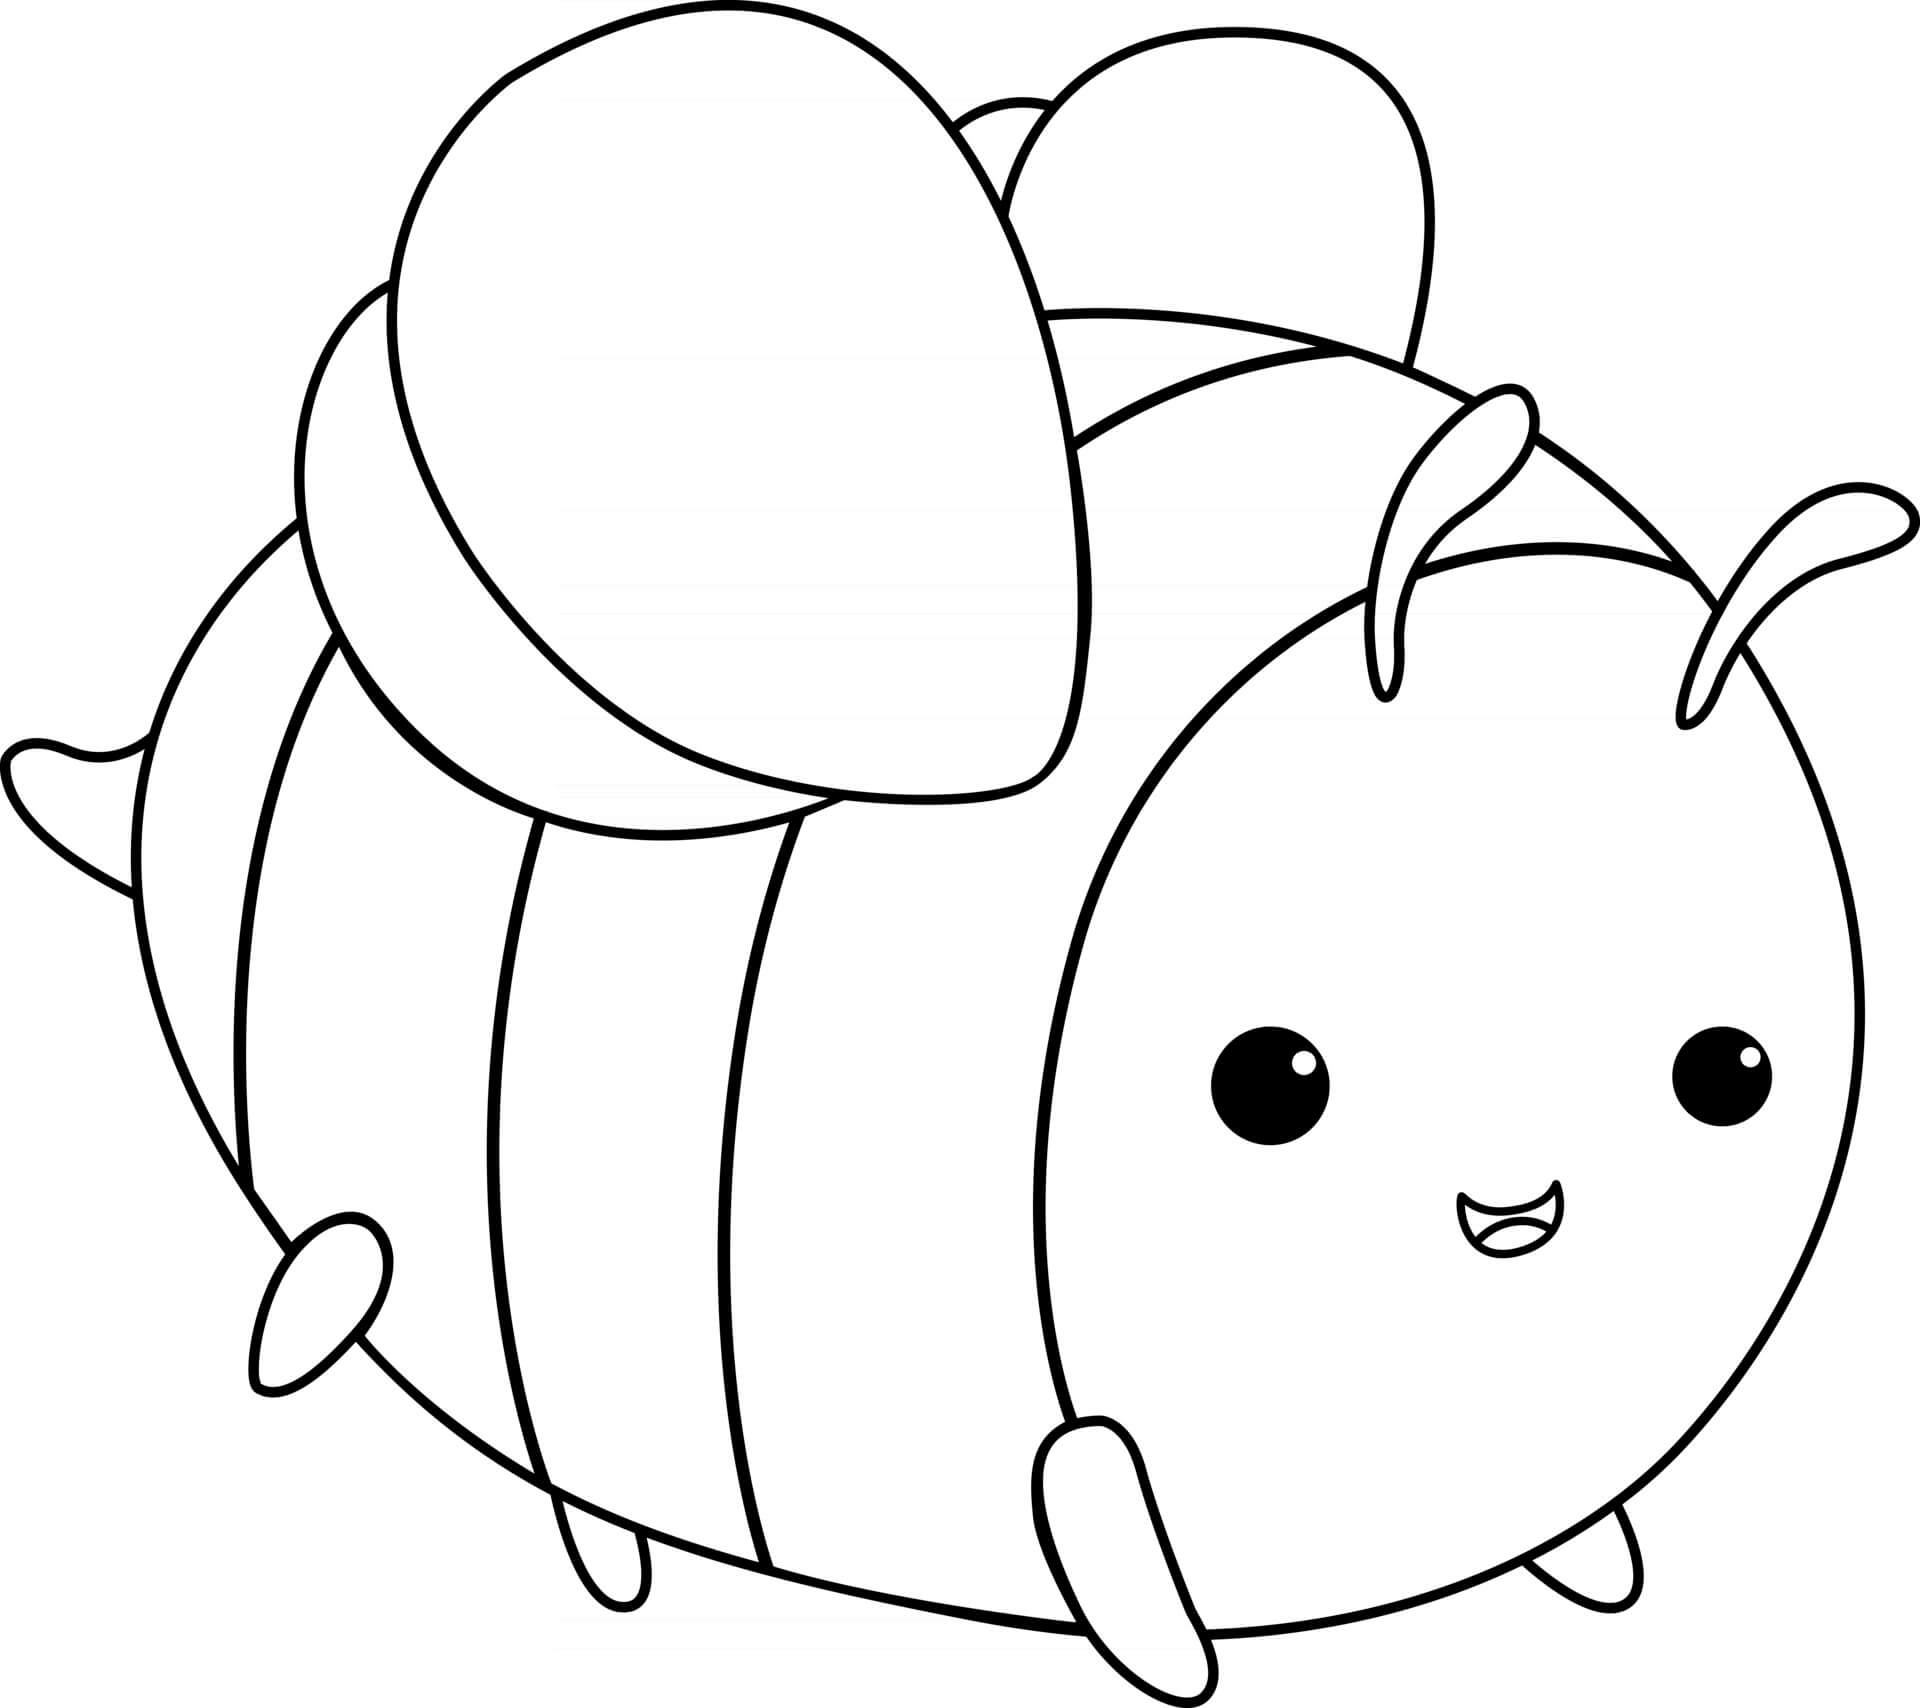 Bee Cute Animal Coloring Pages   Coloring Cool